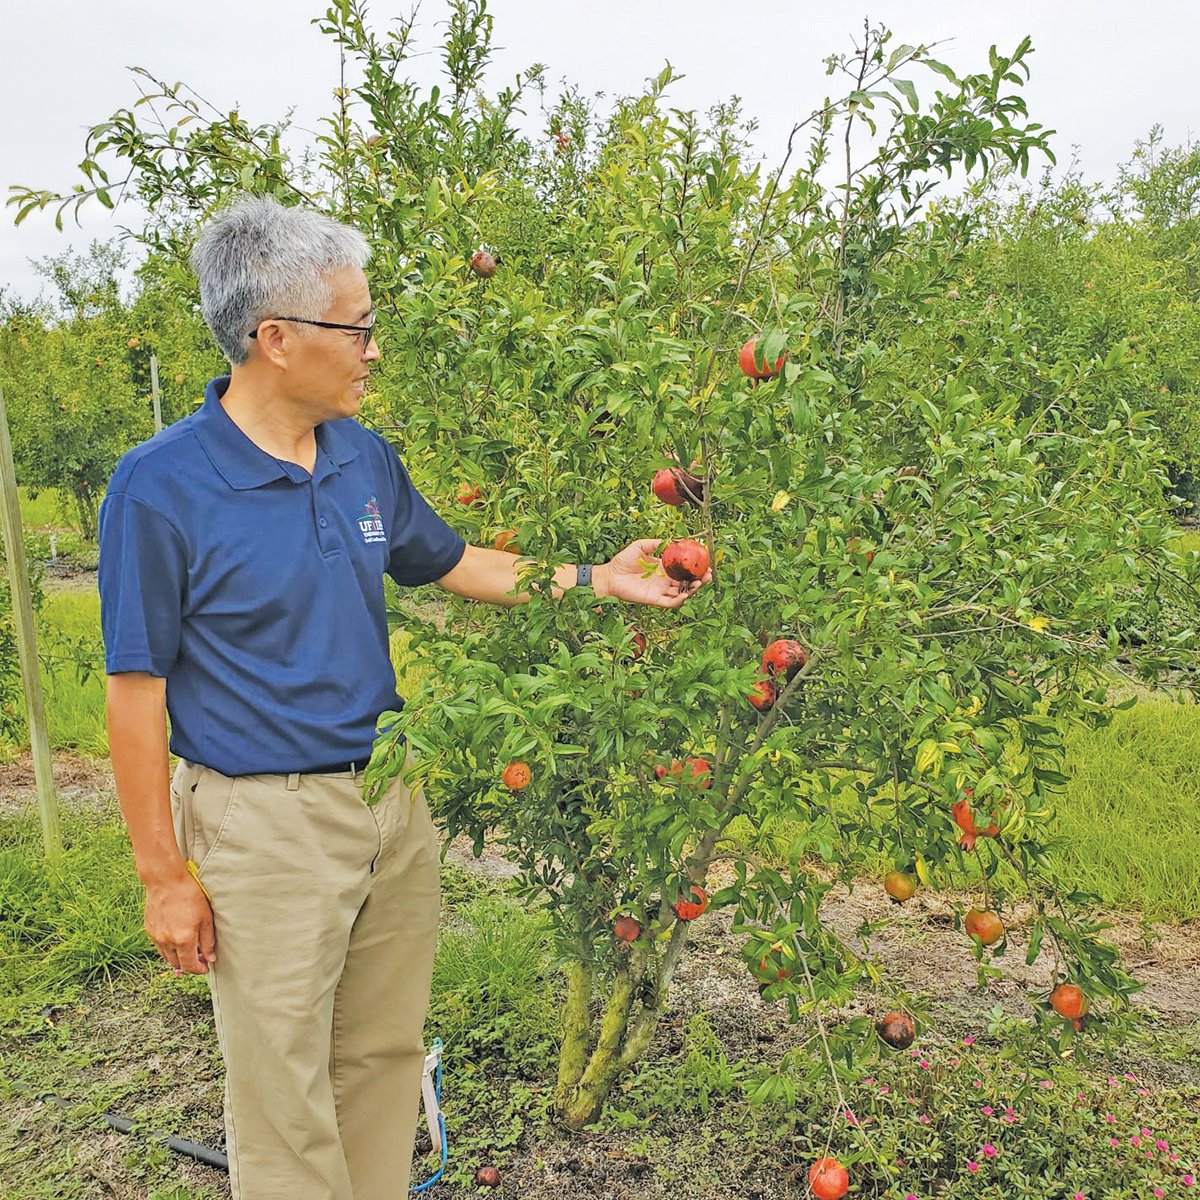 Dr. Zhanao Deng showing a pomegranate still on a tree on his research farm at the Gulf Coast Research and Education Center.